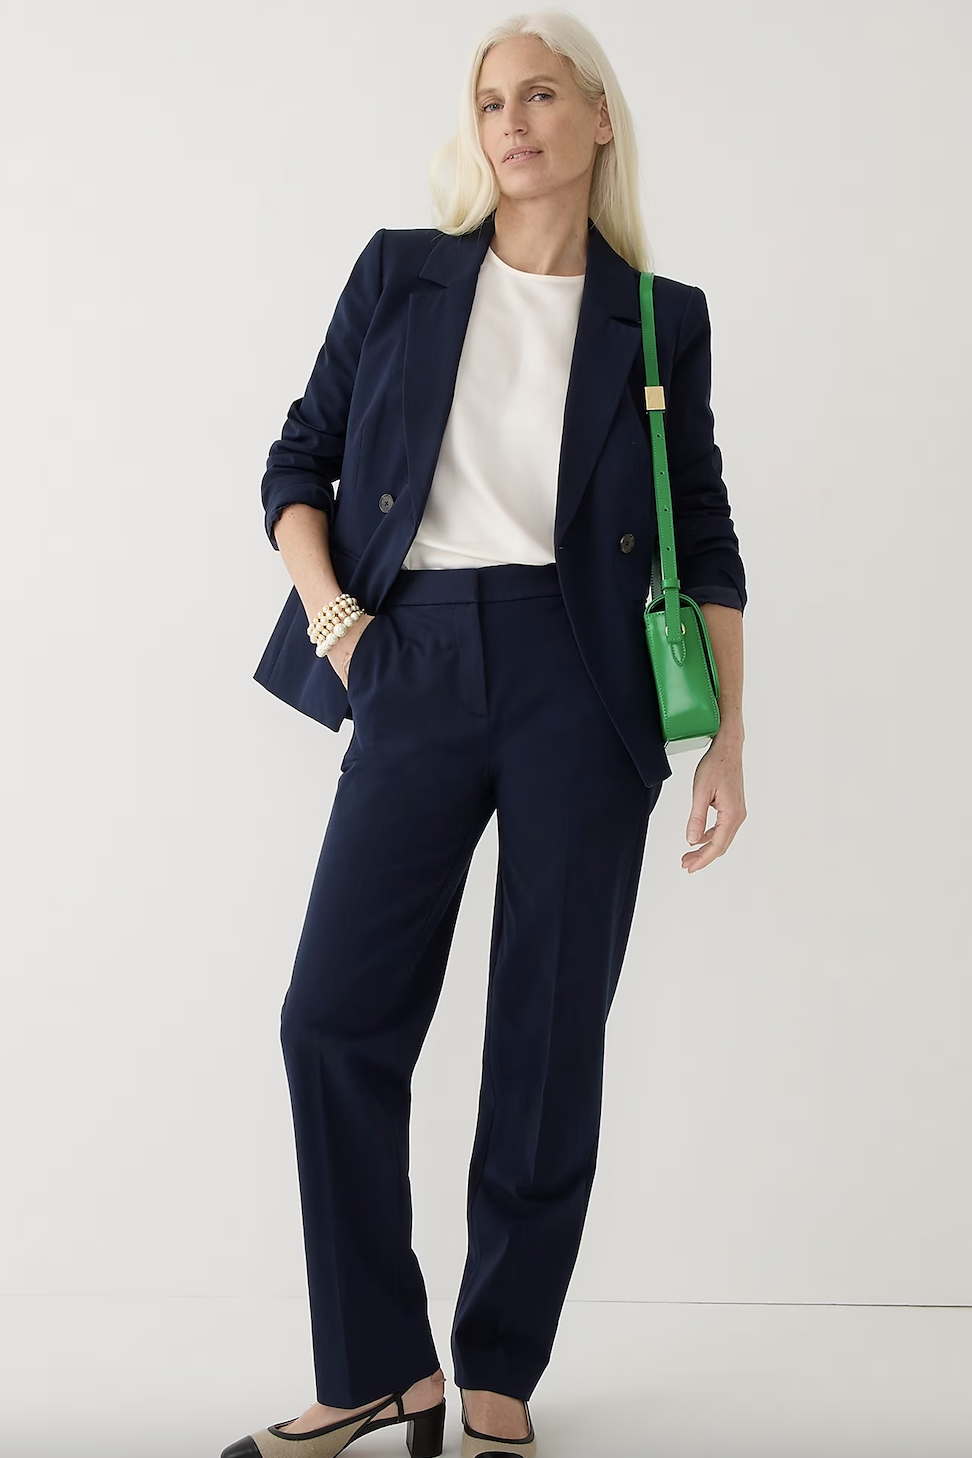 Work Pants for Women: Top Picks for All Types of Jobs